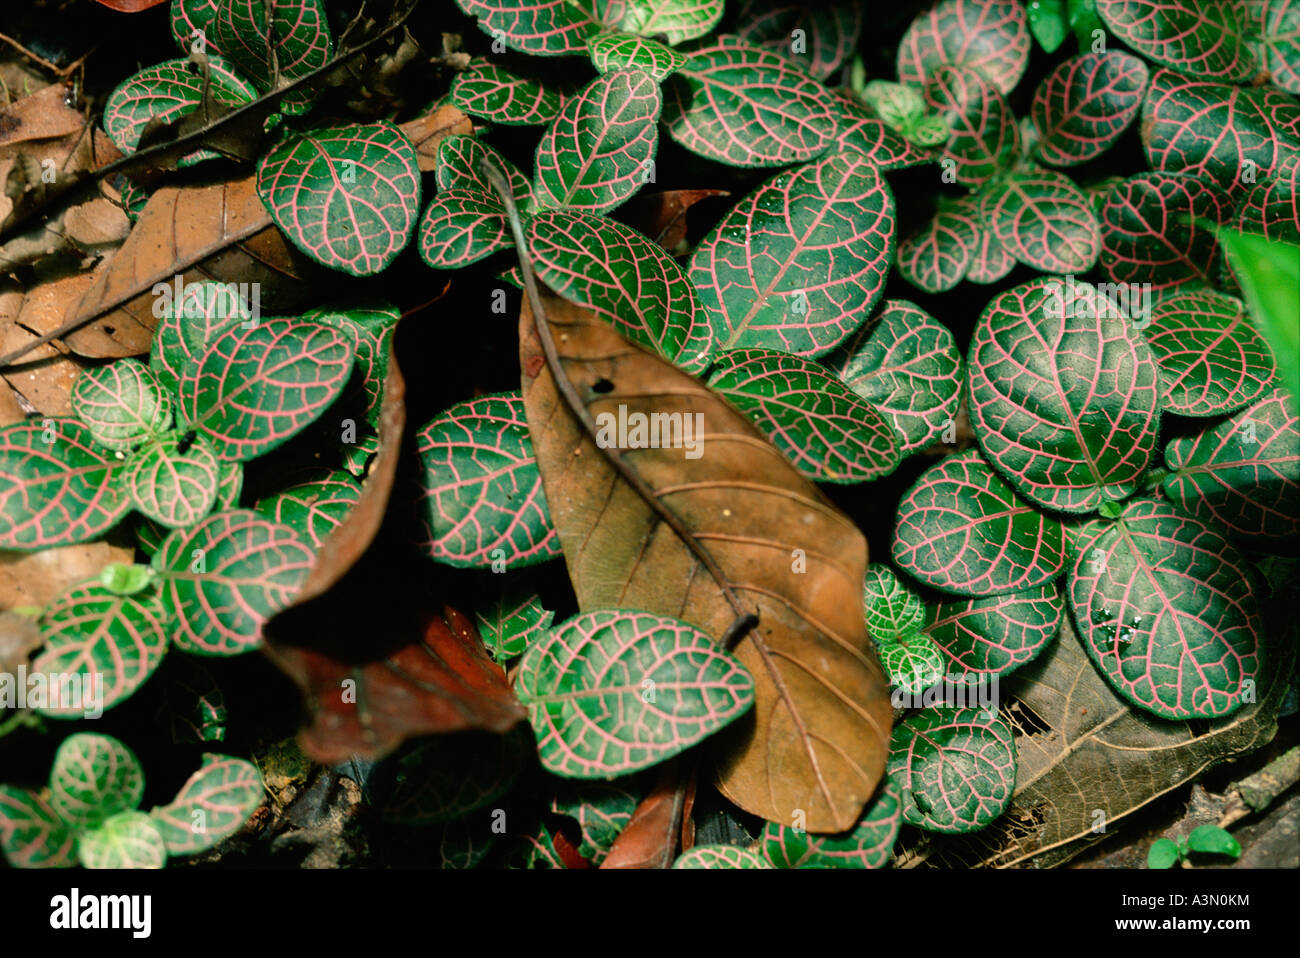 Fittonia sp. family Acanthaceae, trailing plant with pink leaf nervation on floor of rainforest, Amazon region, Peru Stock Photo